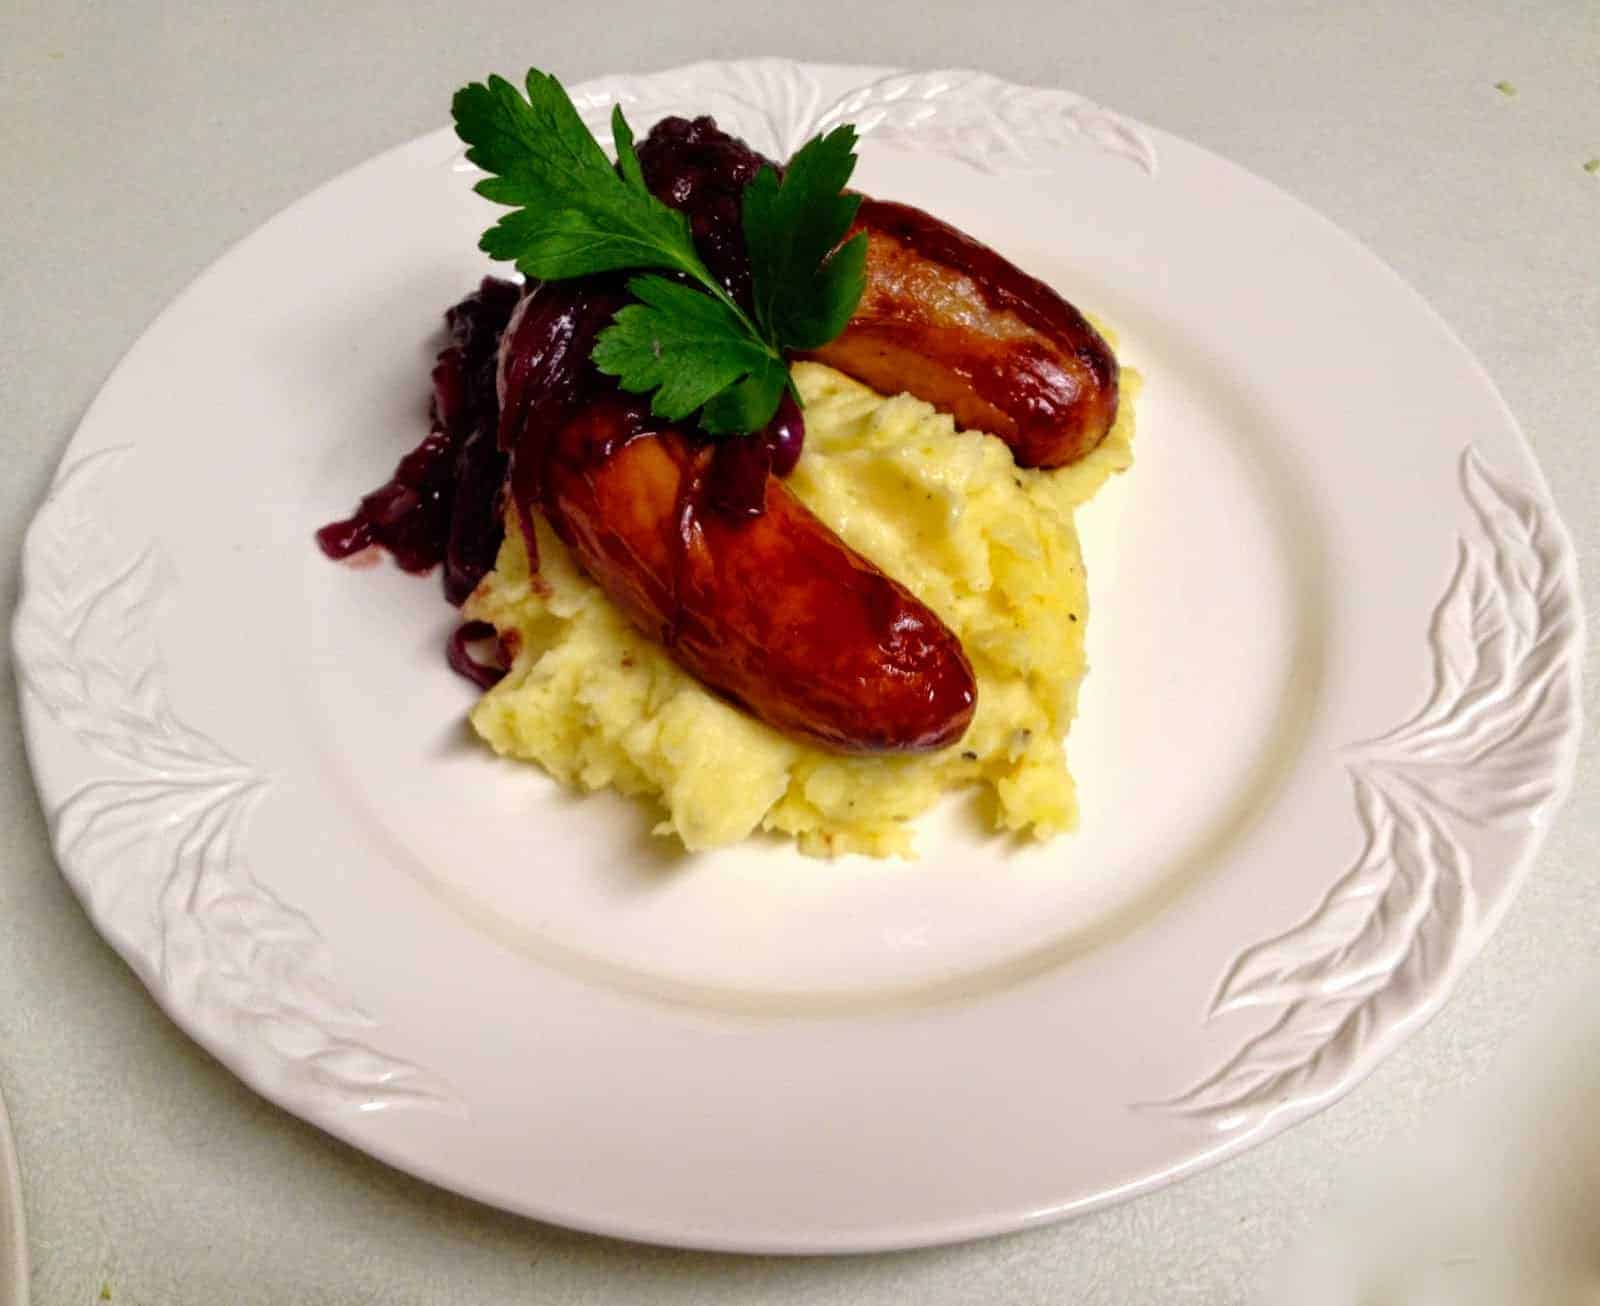 Bangers, Mash and Red Onion Gravy..no better way to celebrate St. Patrick’s Day